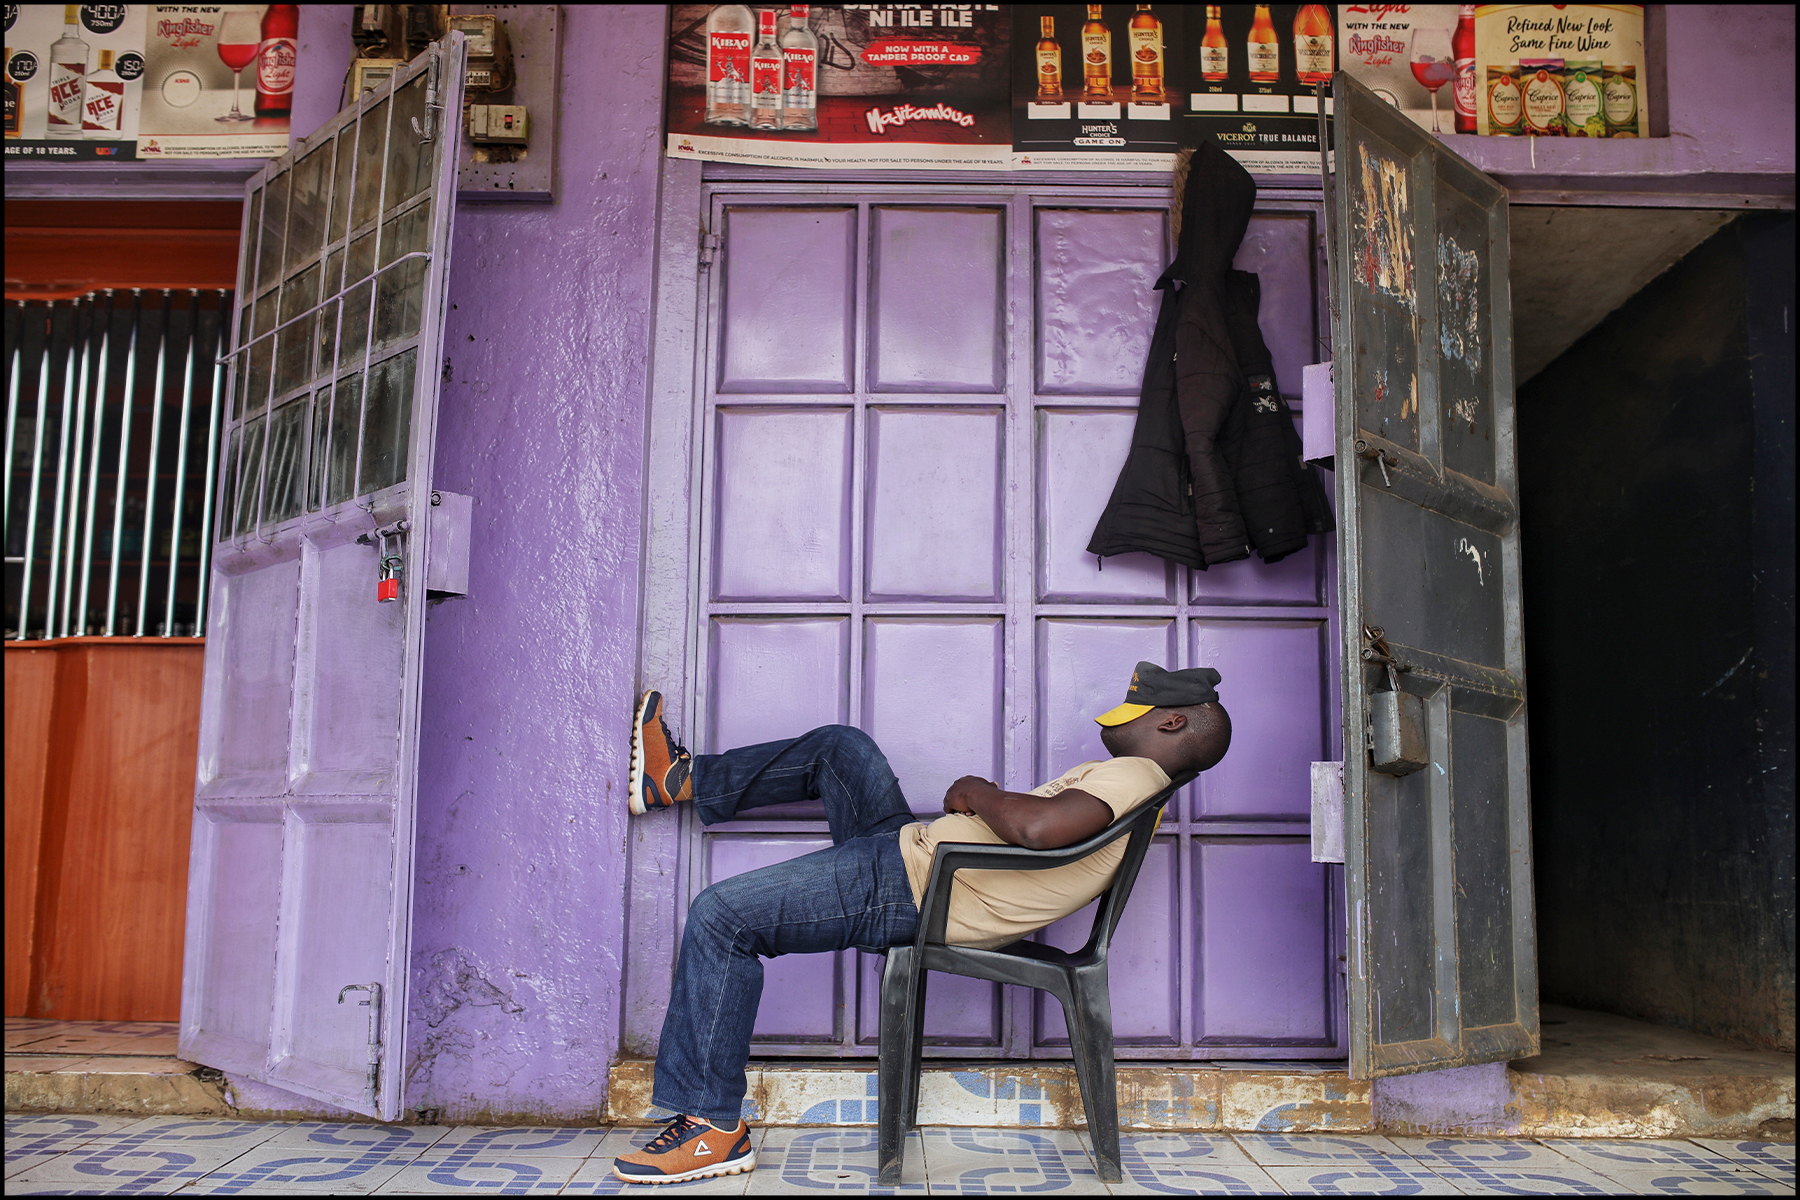 A travel storytelling slideshow featuring Murugi's photography: 1 of 9 - A man takes nap in a chair in Kenya.